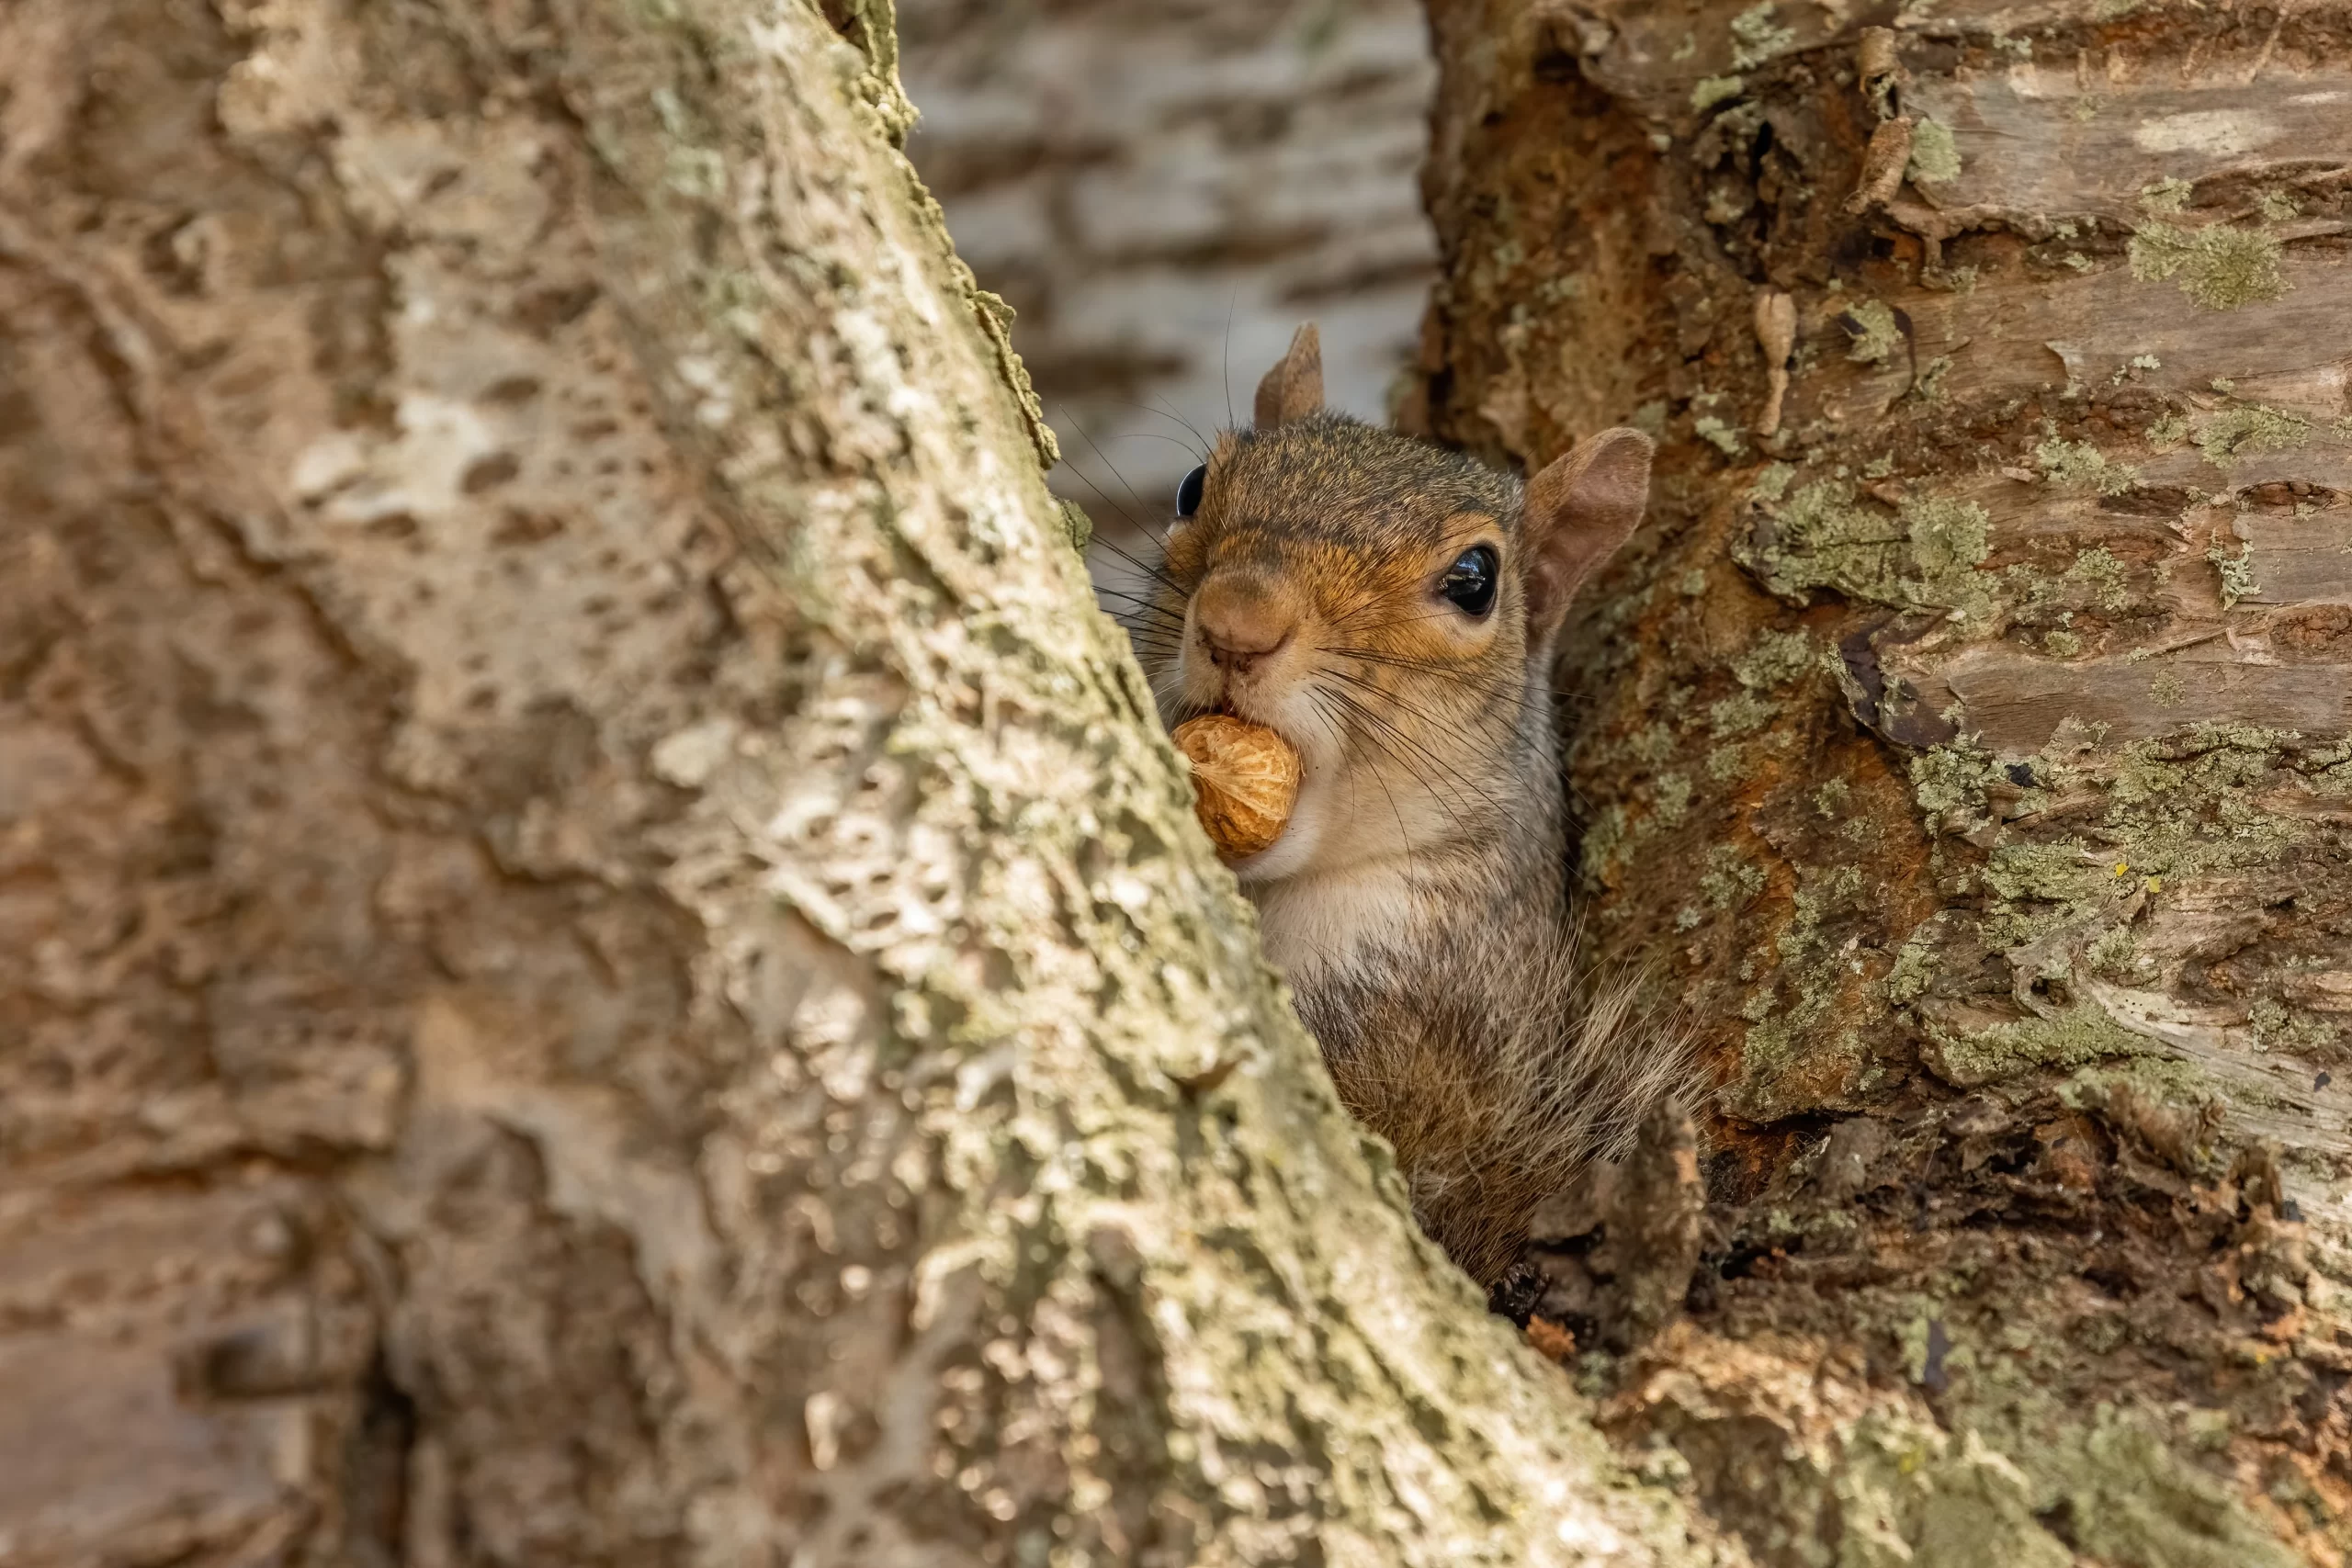 andy-holmes-brown-squirrel-nesting-large-Cherry-Tree-Chatham-Kent-unsplash-scaled.webp